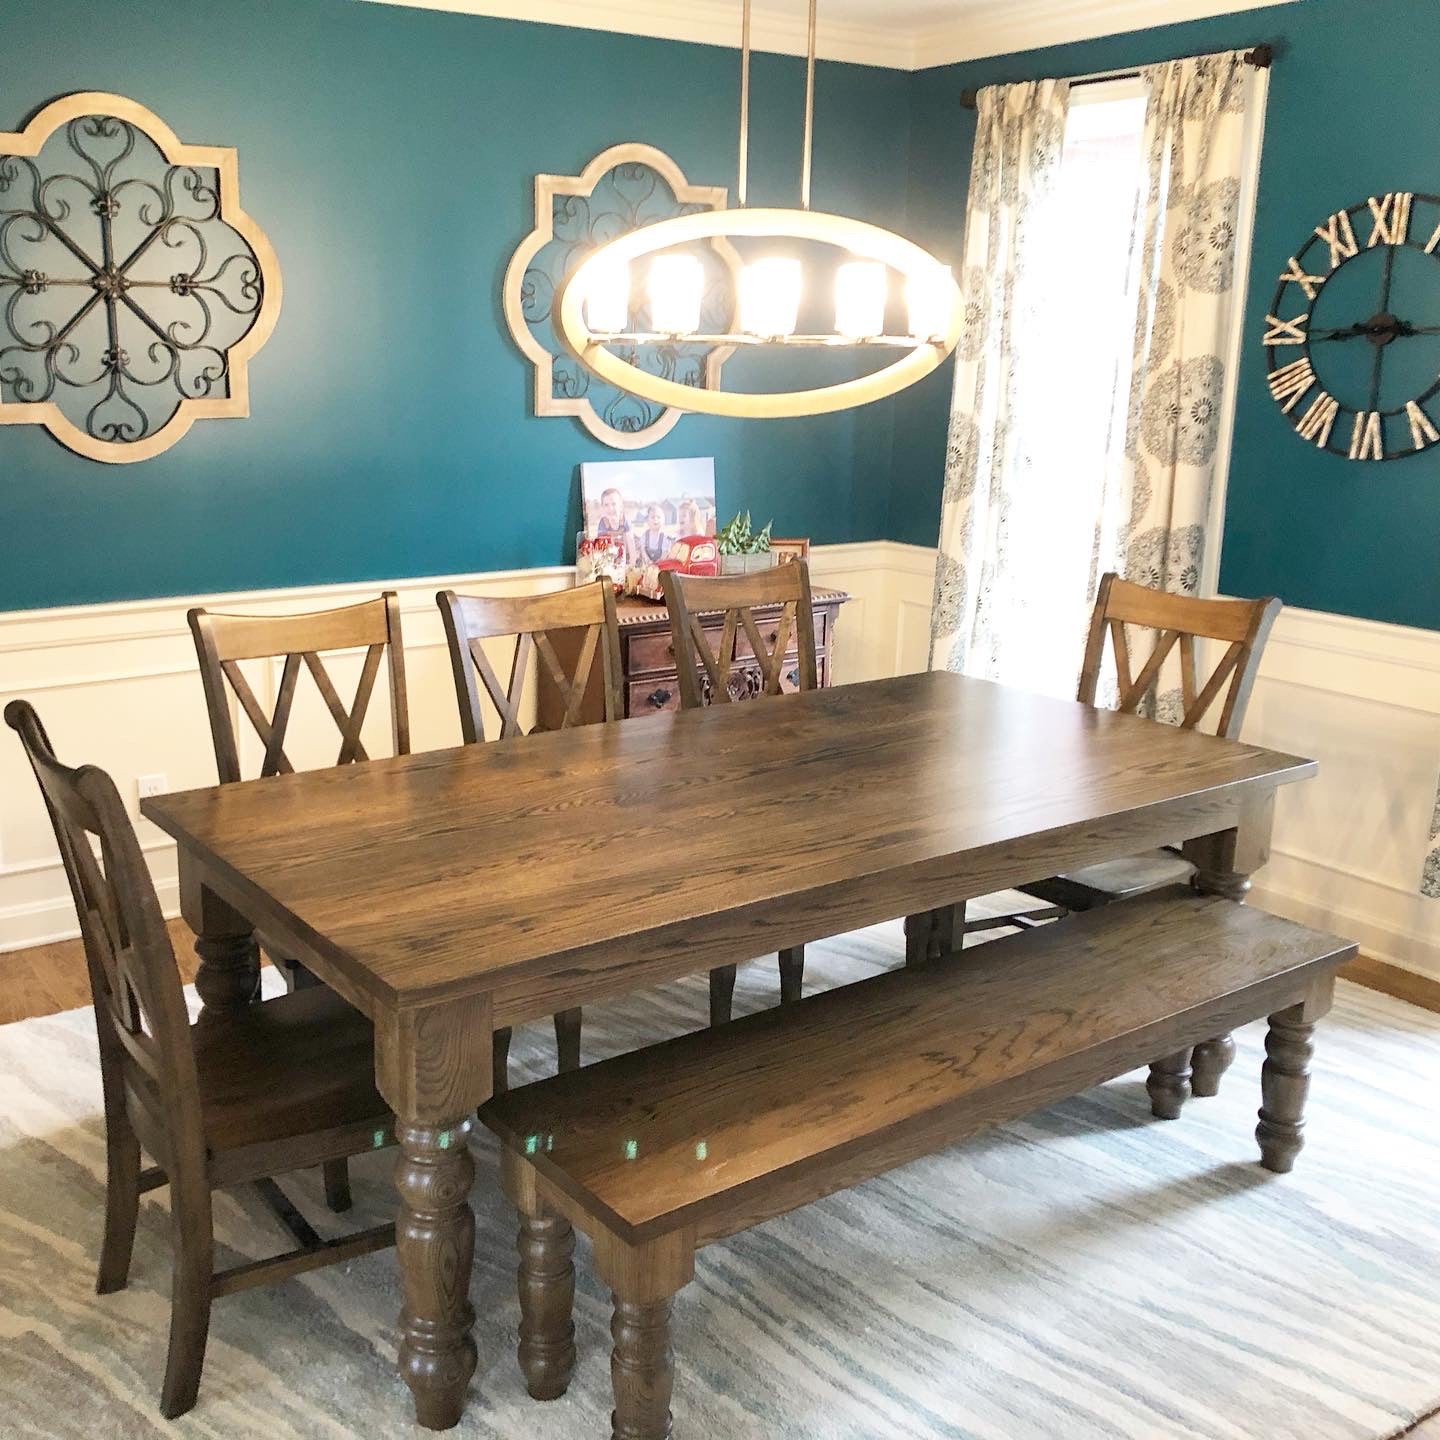 Pictured with a 7' L x 42" W White Oak table with matching White Oak Legs stained Espresso. Pictured with a Matching Bench and 5 Double Cross Back Chairs.